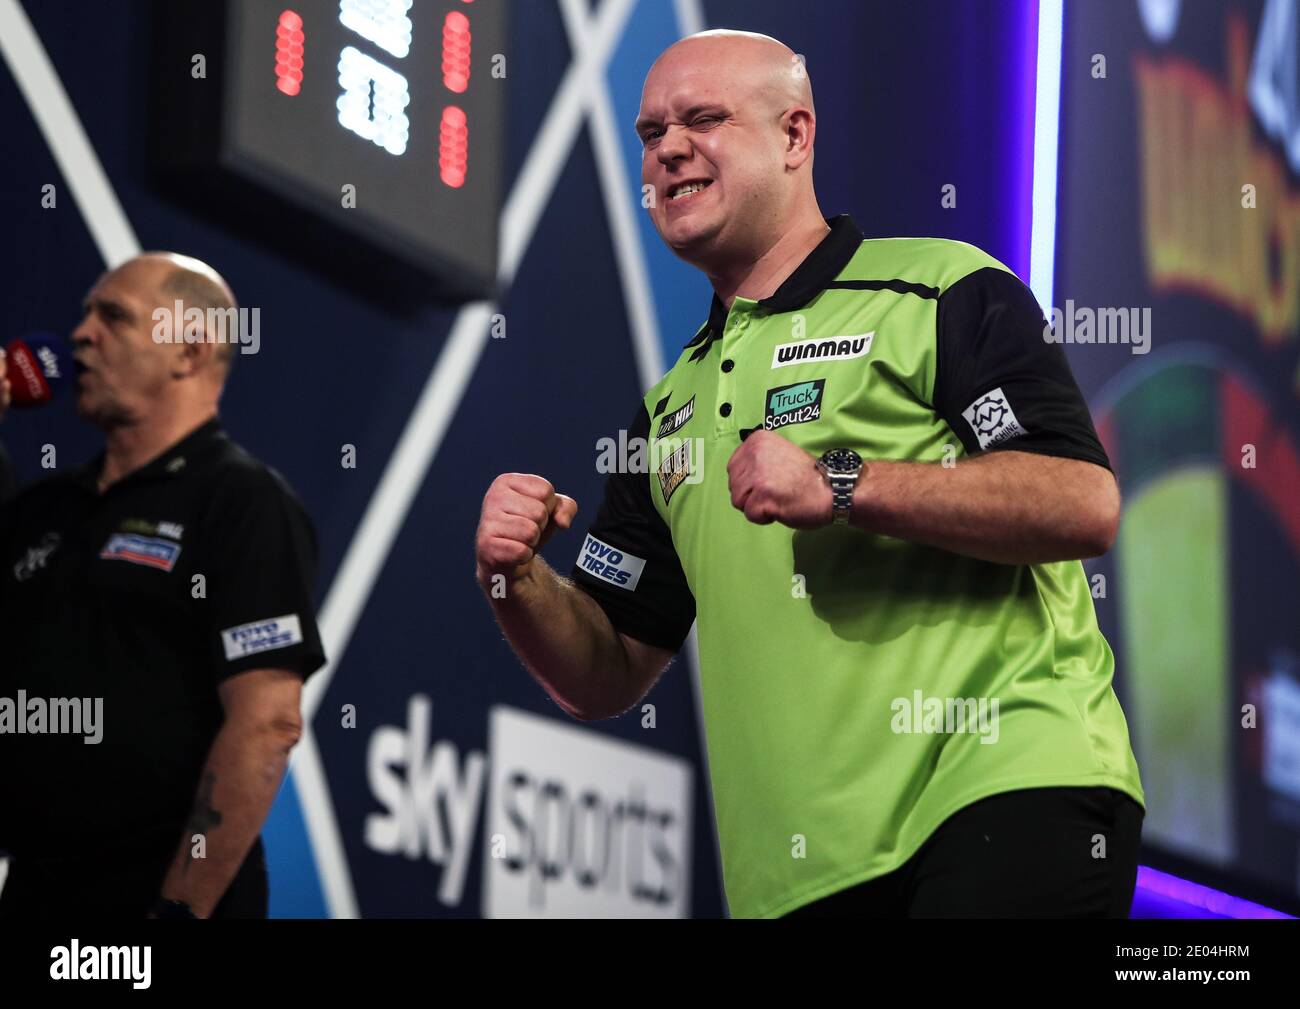 Michael Gerwen celebrates after hitting a 180 during day of the William Hill World Darts Championship at Alexandra Palace, London Stock Photo - Alamy